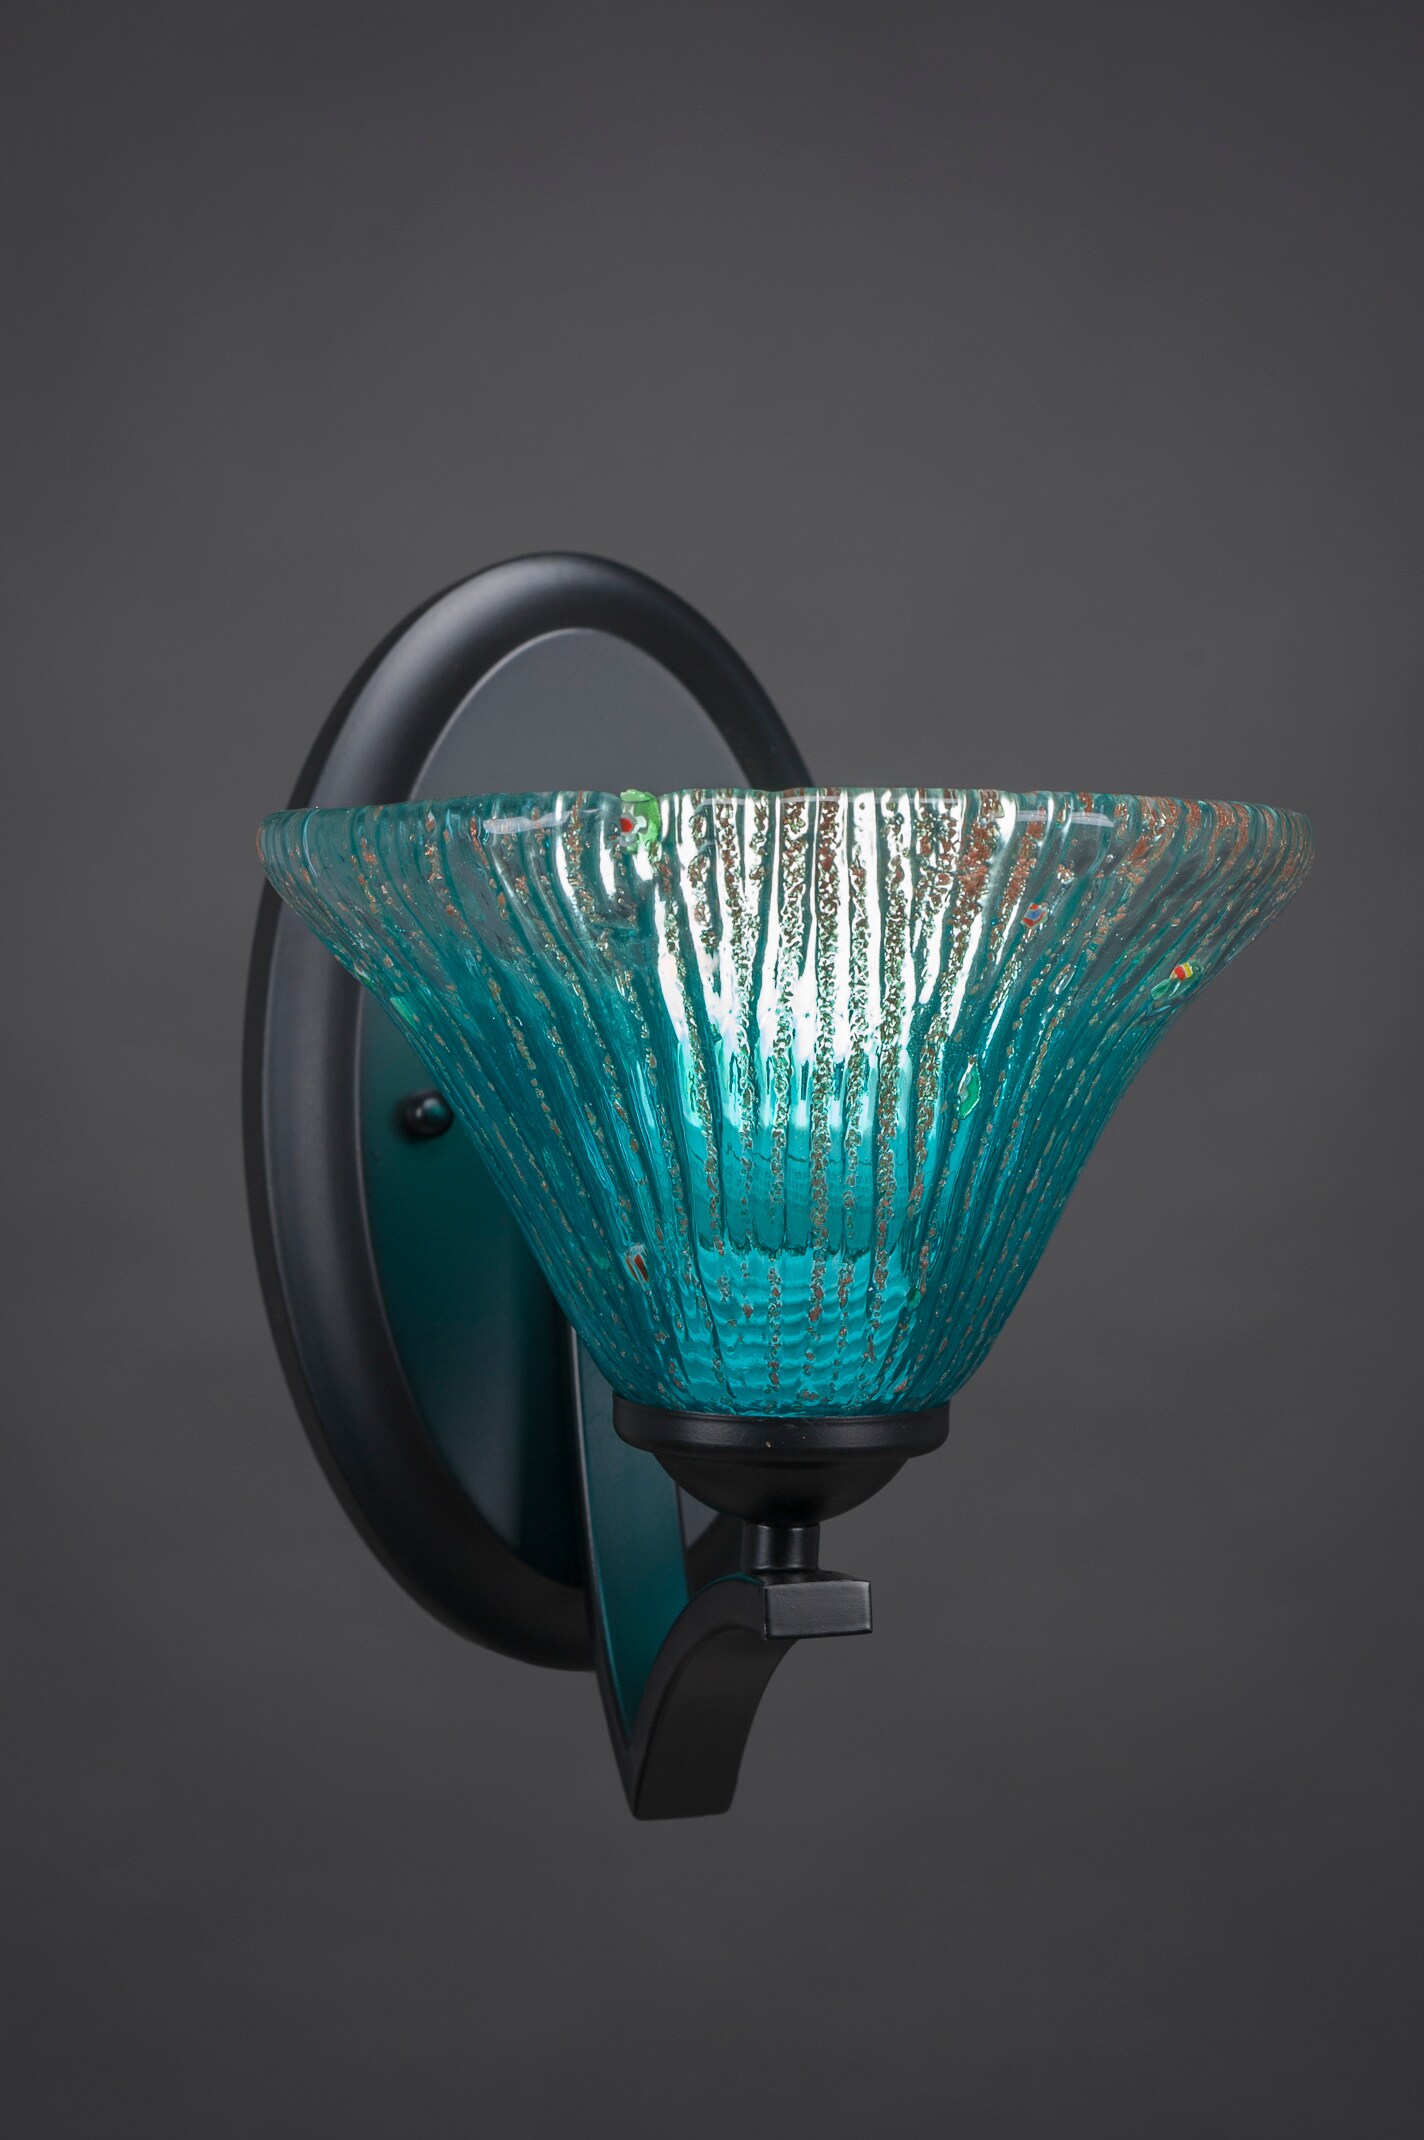 Zilo Wall Sconce Shown In Matte Black Finish With 7 Teal Crystal Glass